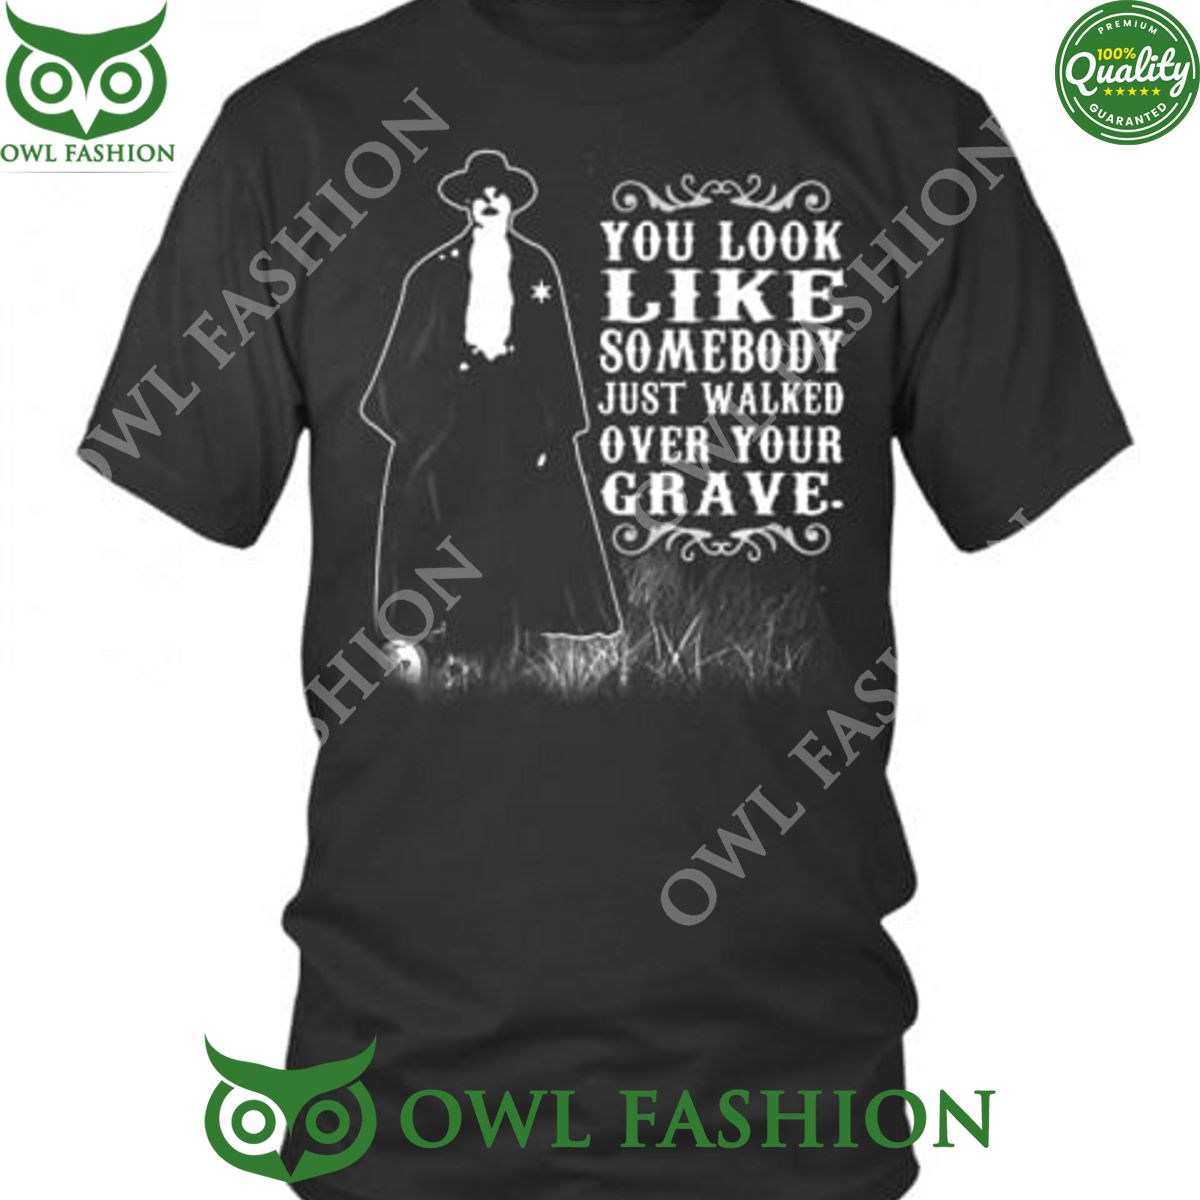 tombstone you look like somebody just walked over your grave 2d t shirt 1 76wBw.jpg